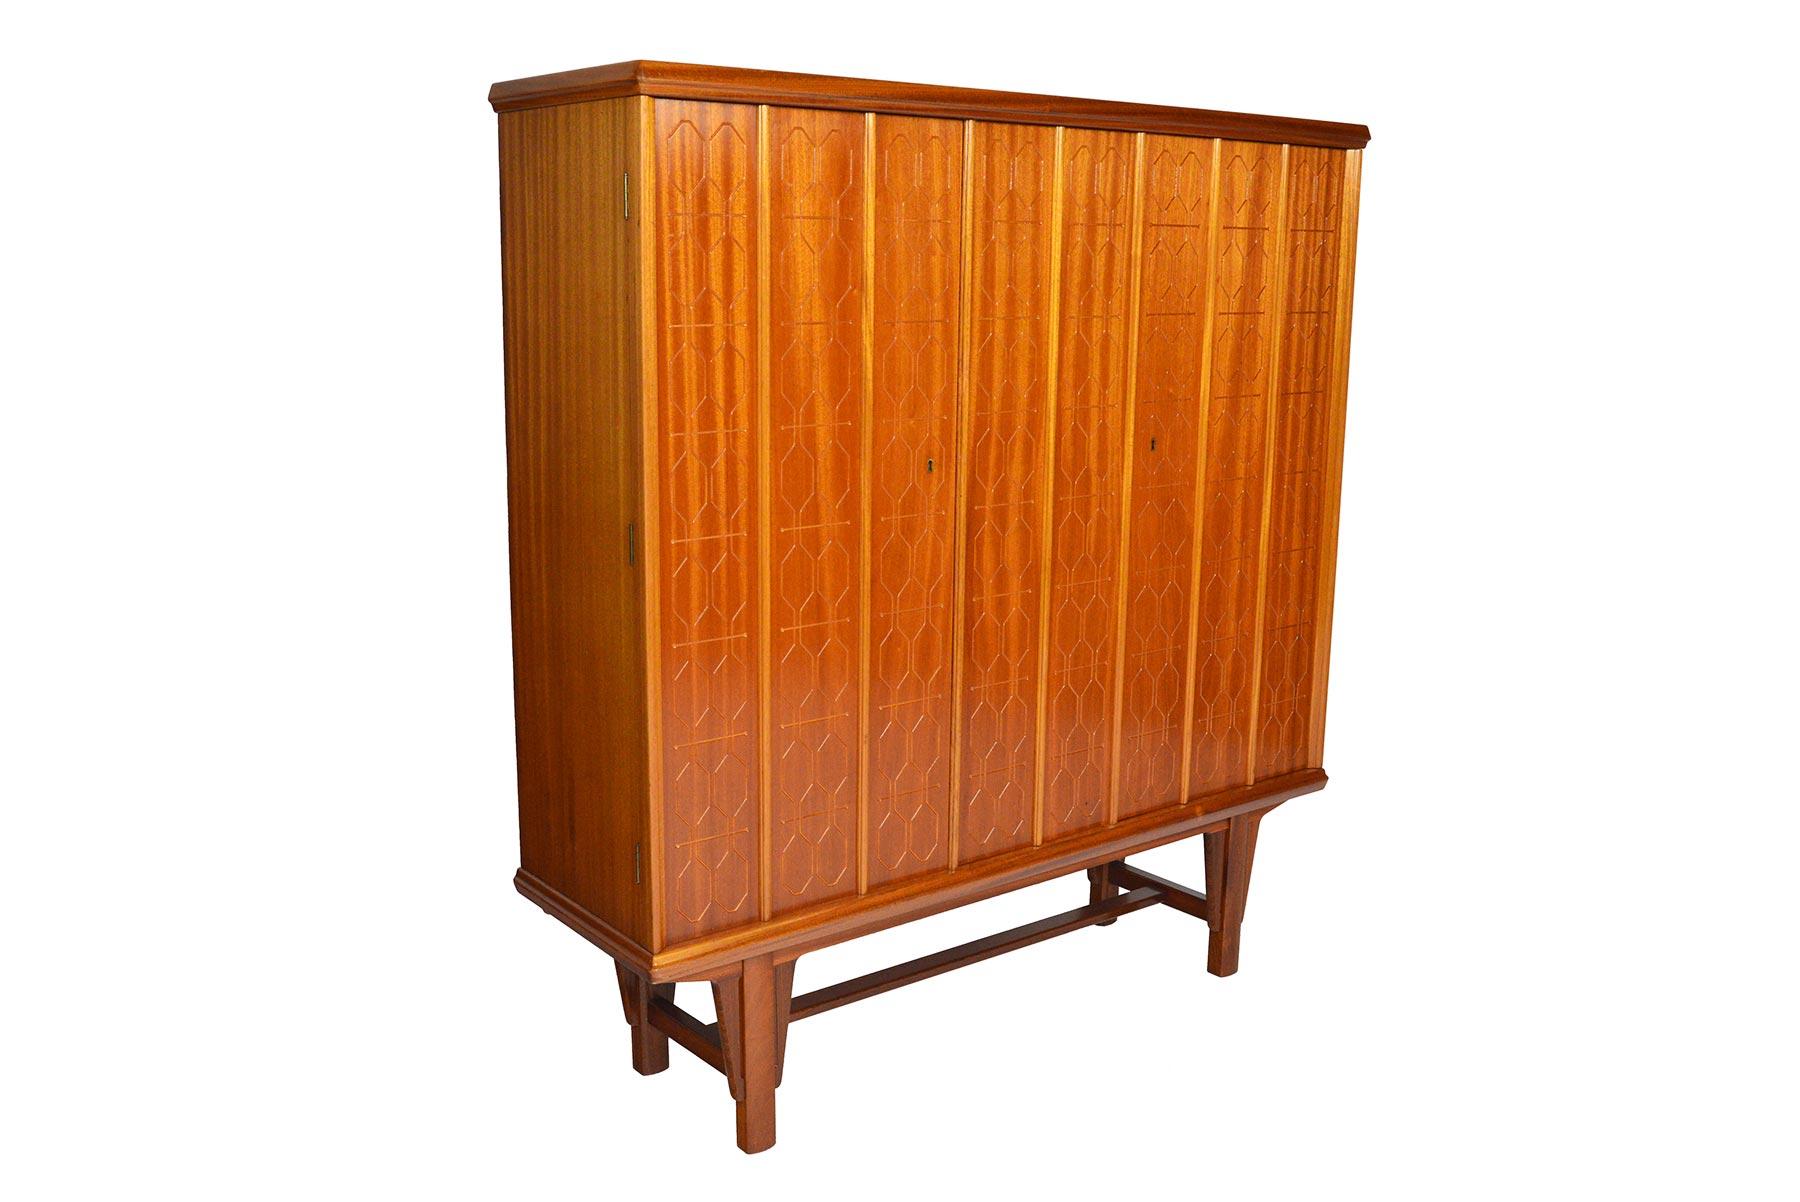 Tall Rastad and Relling Tall Geometric Credenza in Mahogany 1